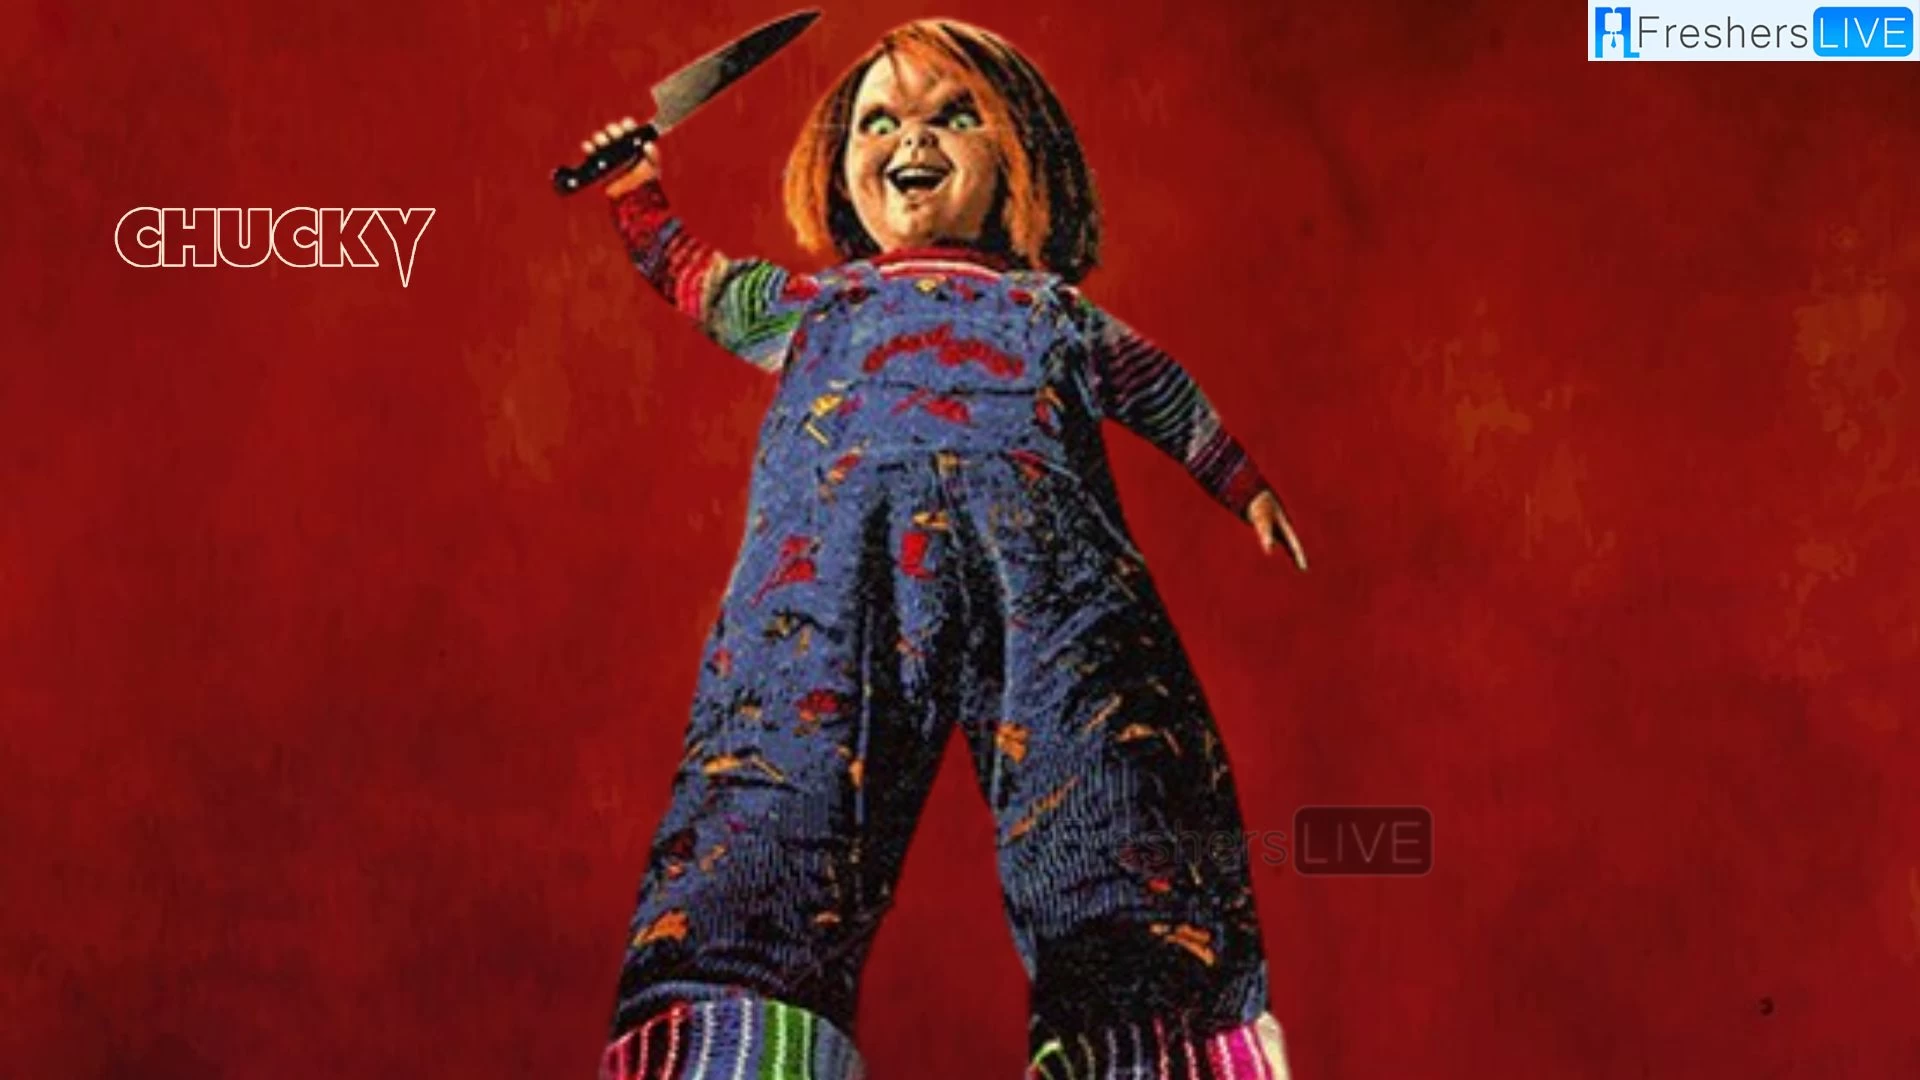 Will Chucky Season 3 be on Peacock? What Time is Chucky Season 3 Coming Out? Where to Watch Chucky Season 3?